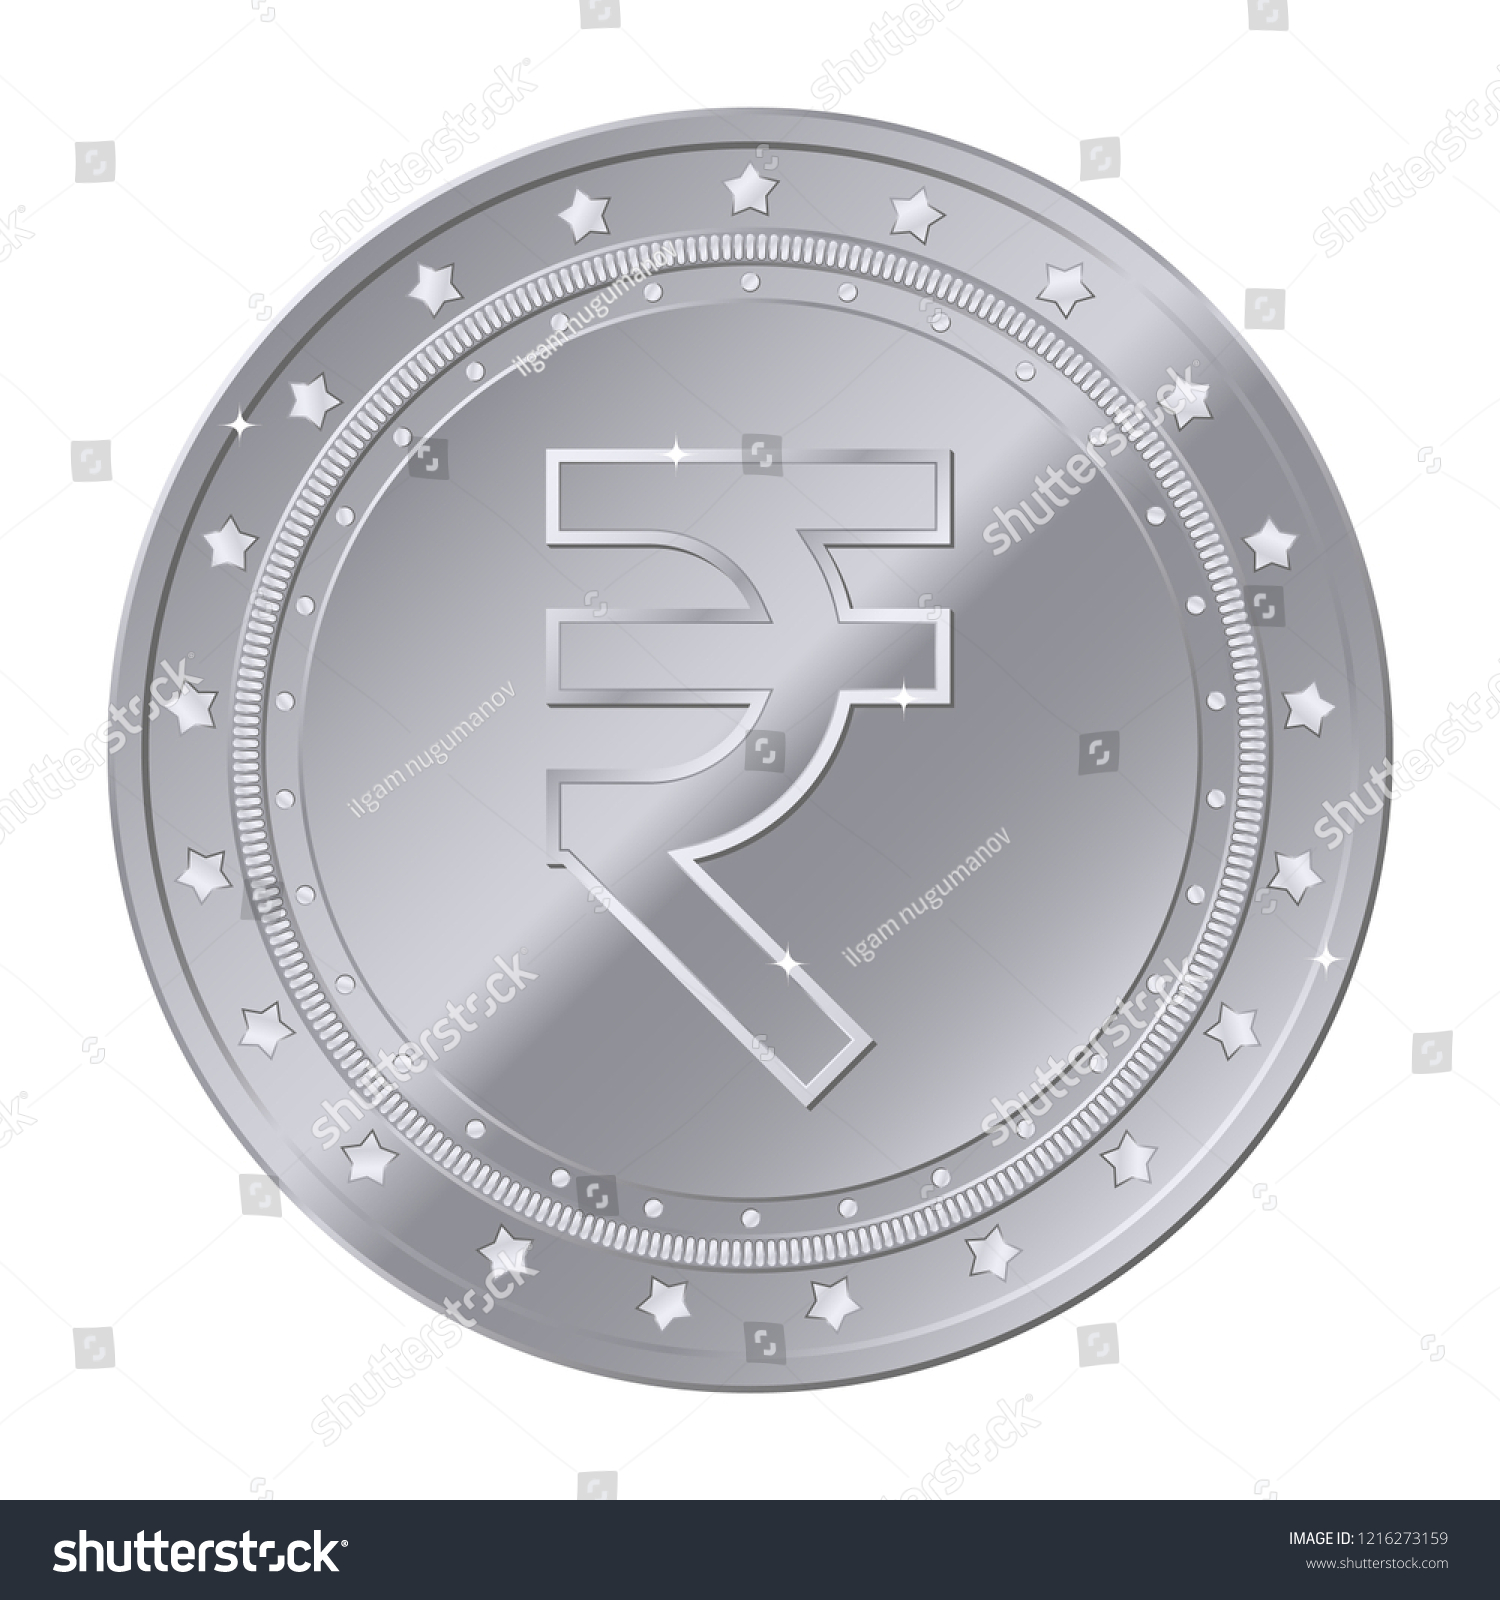 SVG of Rupee currency silver coin with stars. Indian currency. Vector illustration isolated on white background. Editable elements and glare. Suitable for casino game. Rich EPS 10 svg